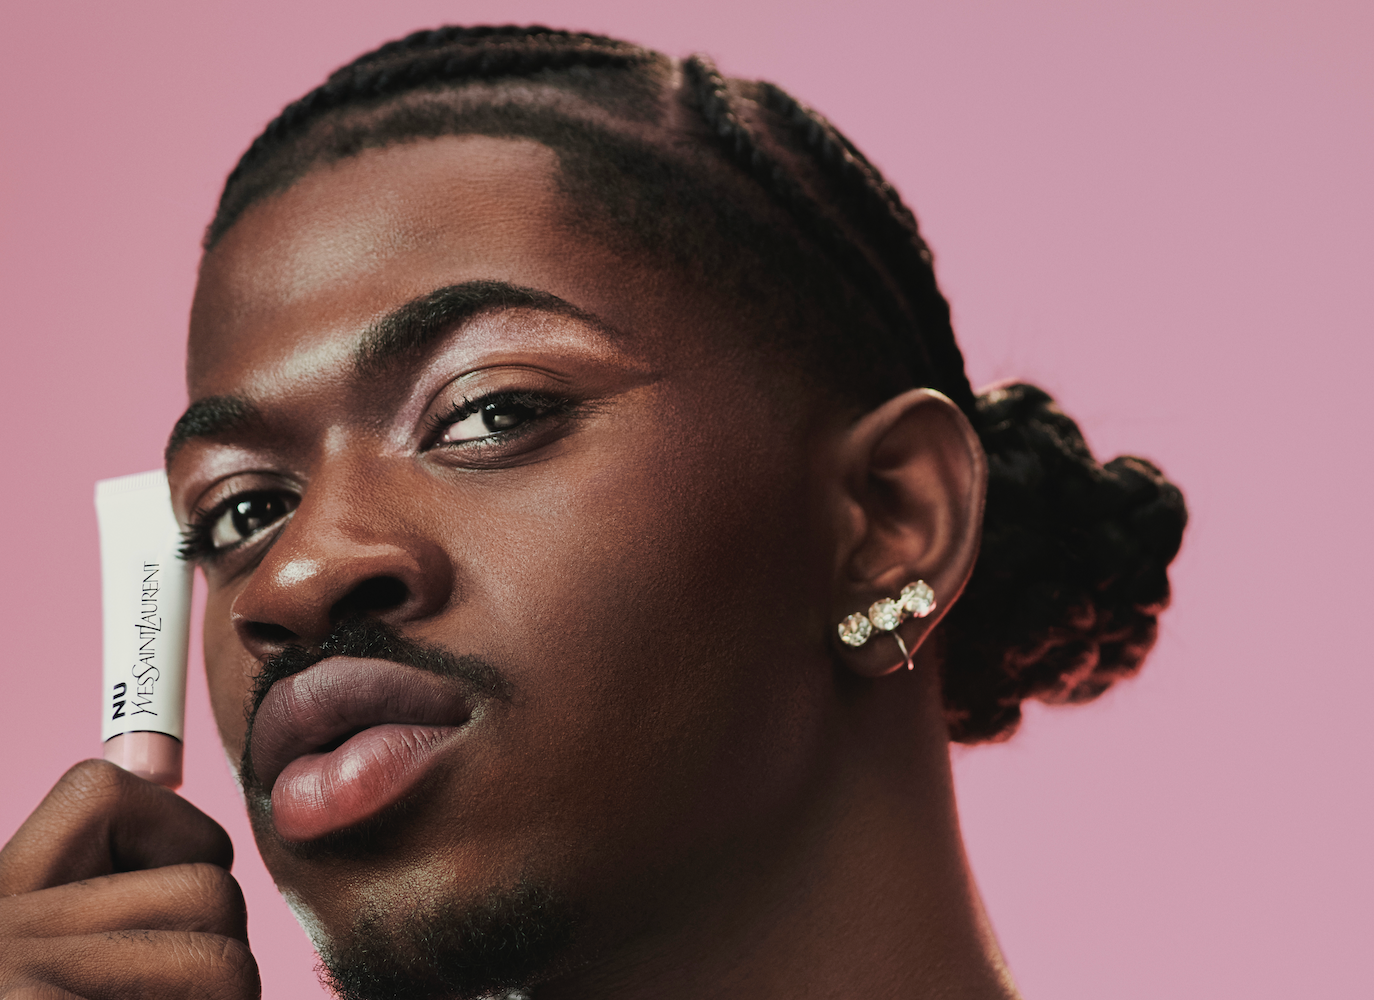 YSL Beauty’s Latest Campaign With Lil Nas X Embraces His Fearless Self–Expression: “We Want To Show Everyone That They Can Experiment With Their Looks”